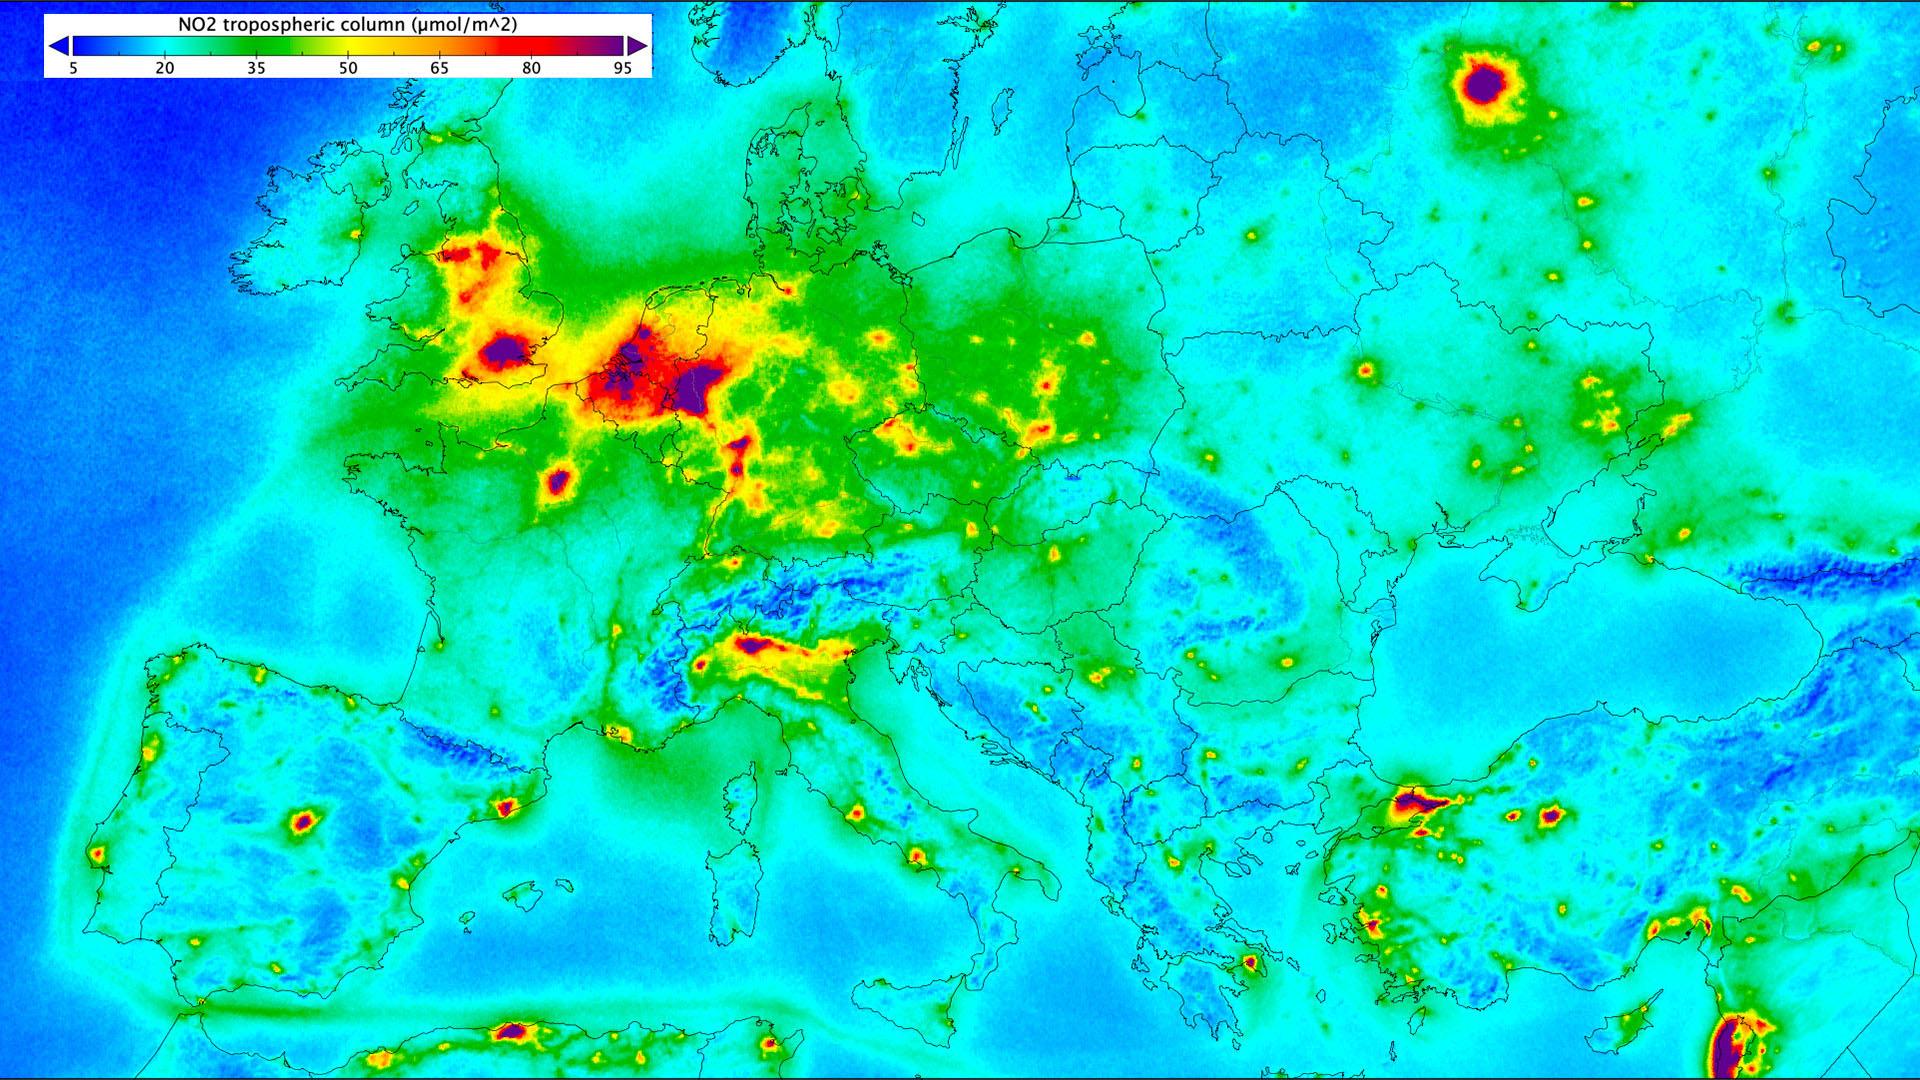 Satellites are invaluable tools for "seeing" man-made emissions. This map, based on measurements taken by the Sentinel-5P satellite between April and September 2018, shows high levels of nitrogen dioxide NO2 over the major European capitals.